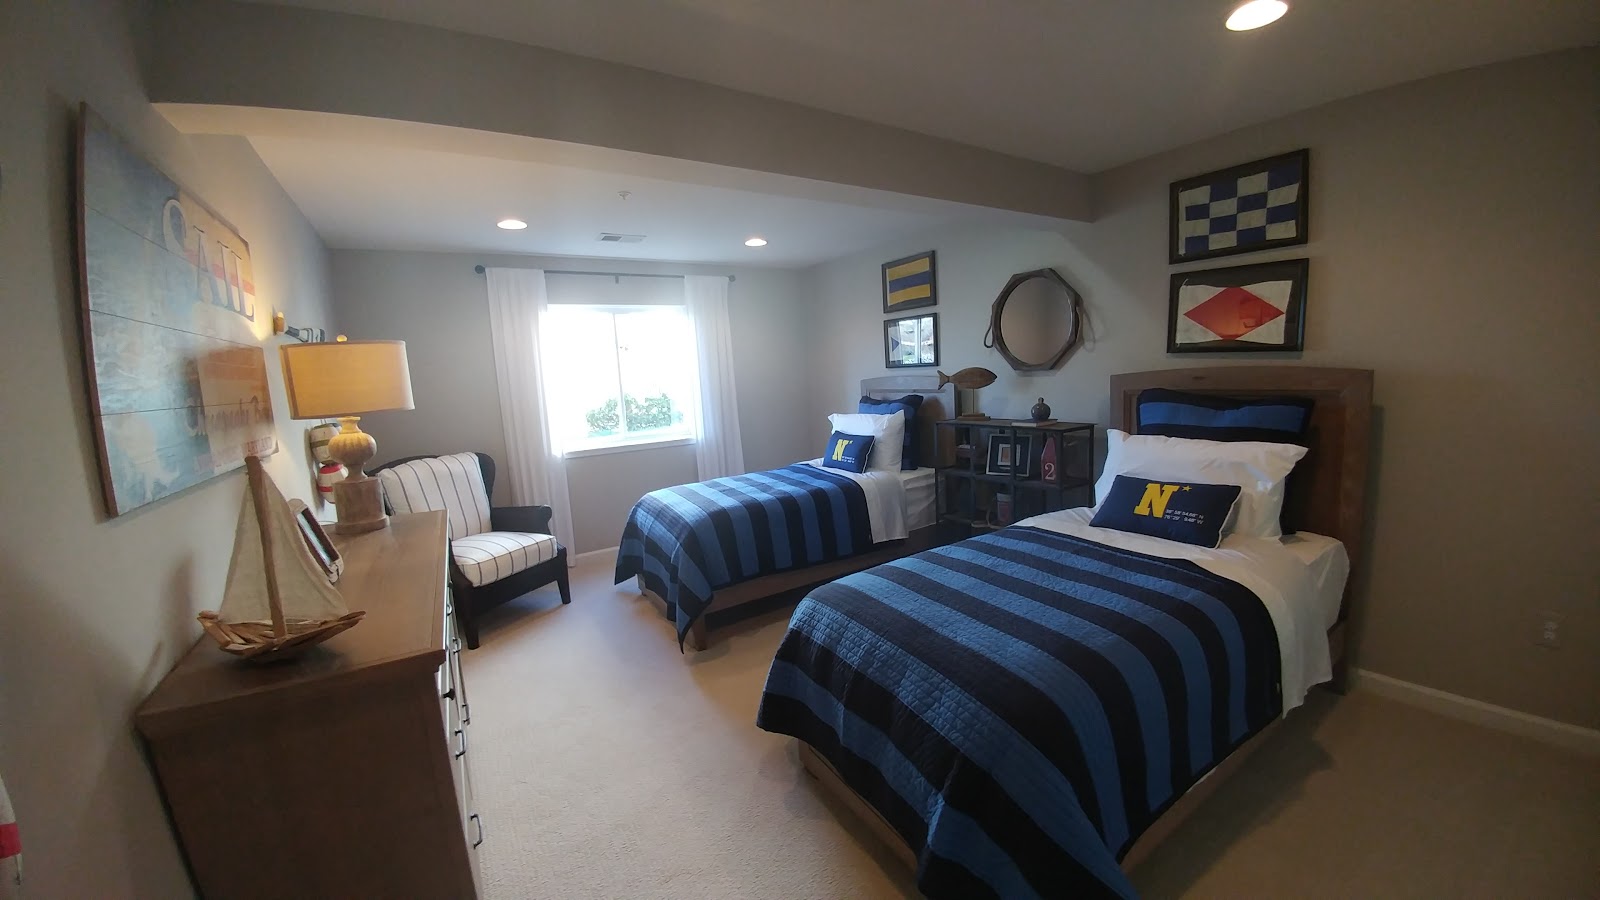 My New Space is a Carolina Place! ~ Ryan Homes Blog: Model Home Pictures